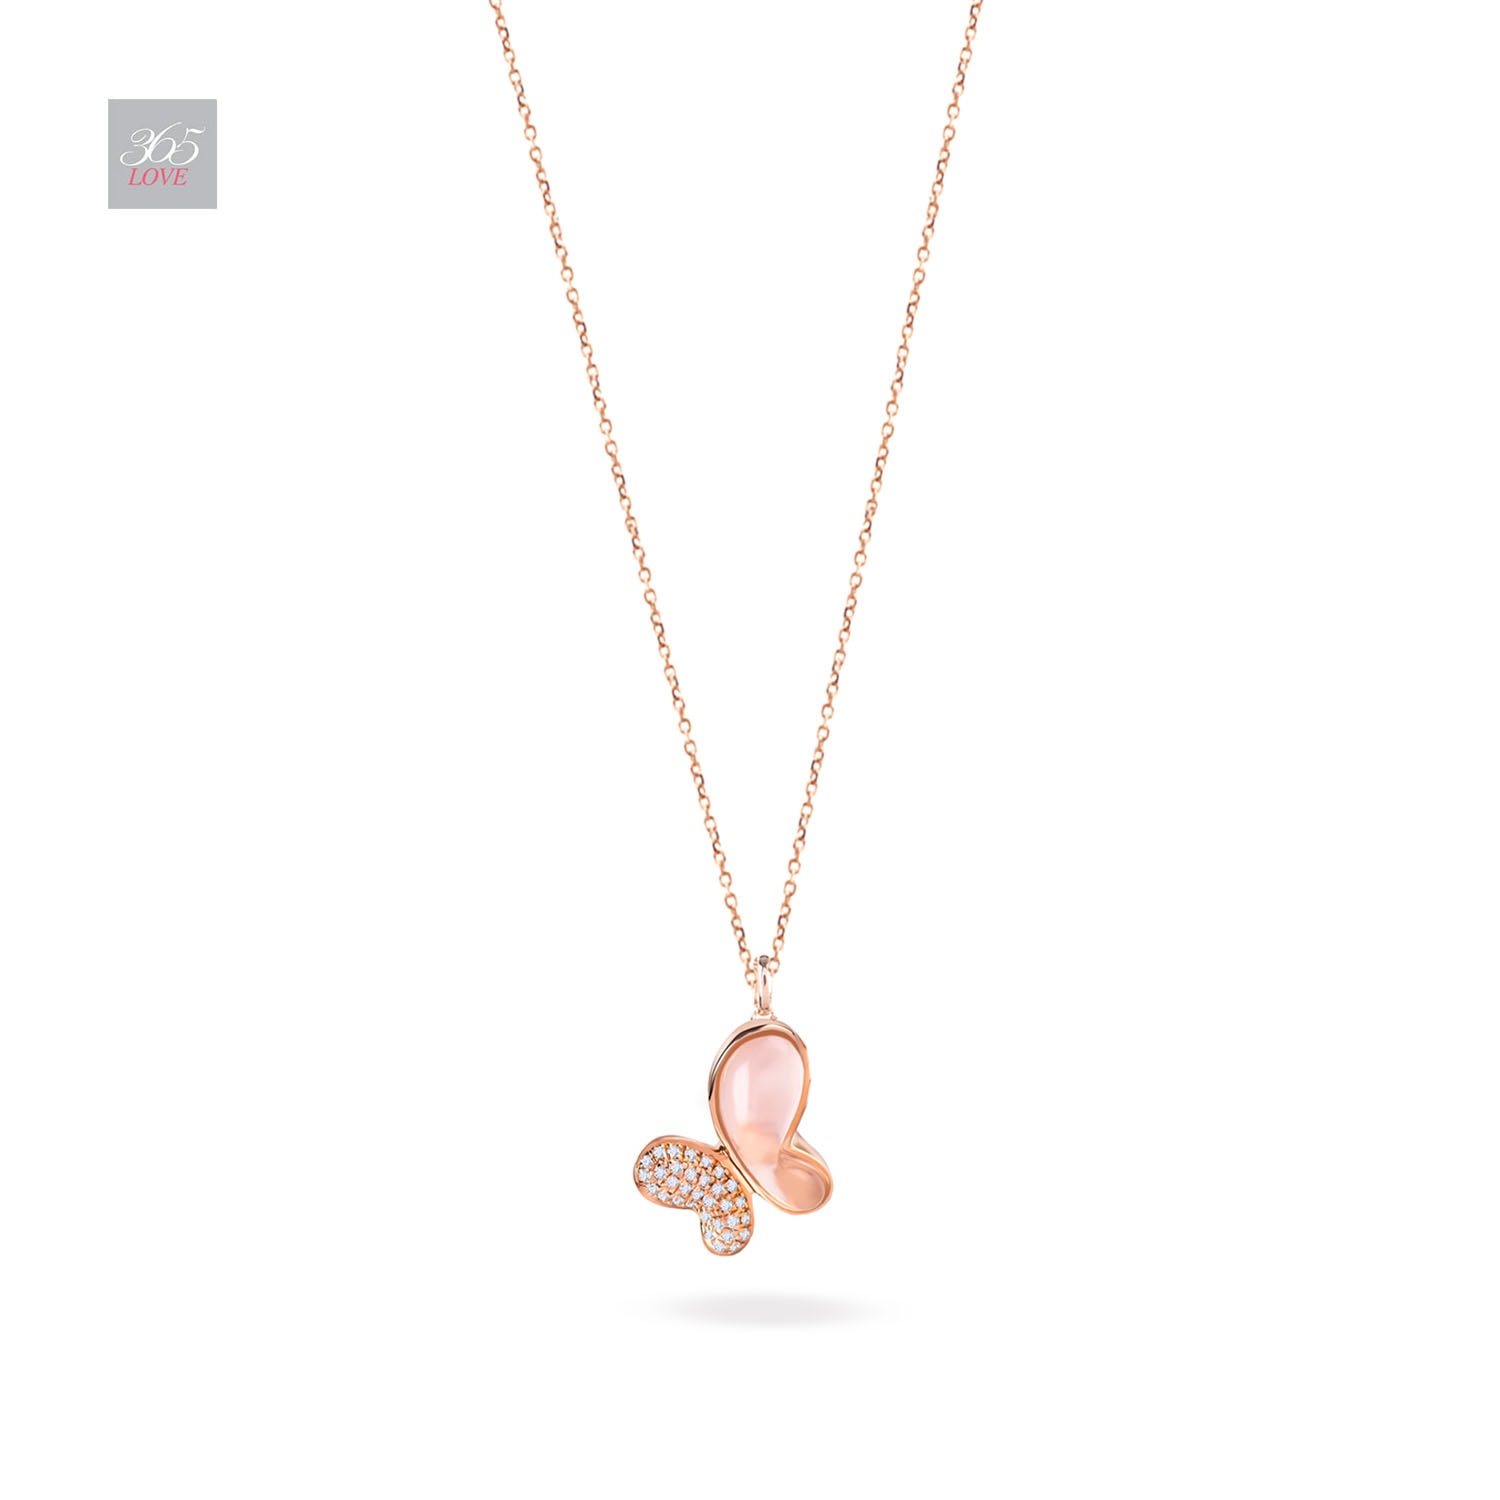 Pristine Butterfly Pendant in 14K Rose Gold with Diamonds